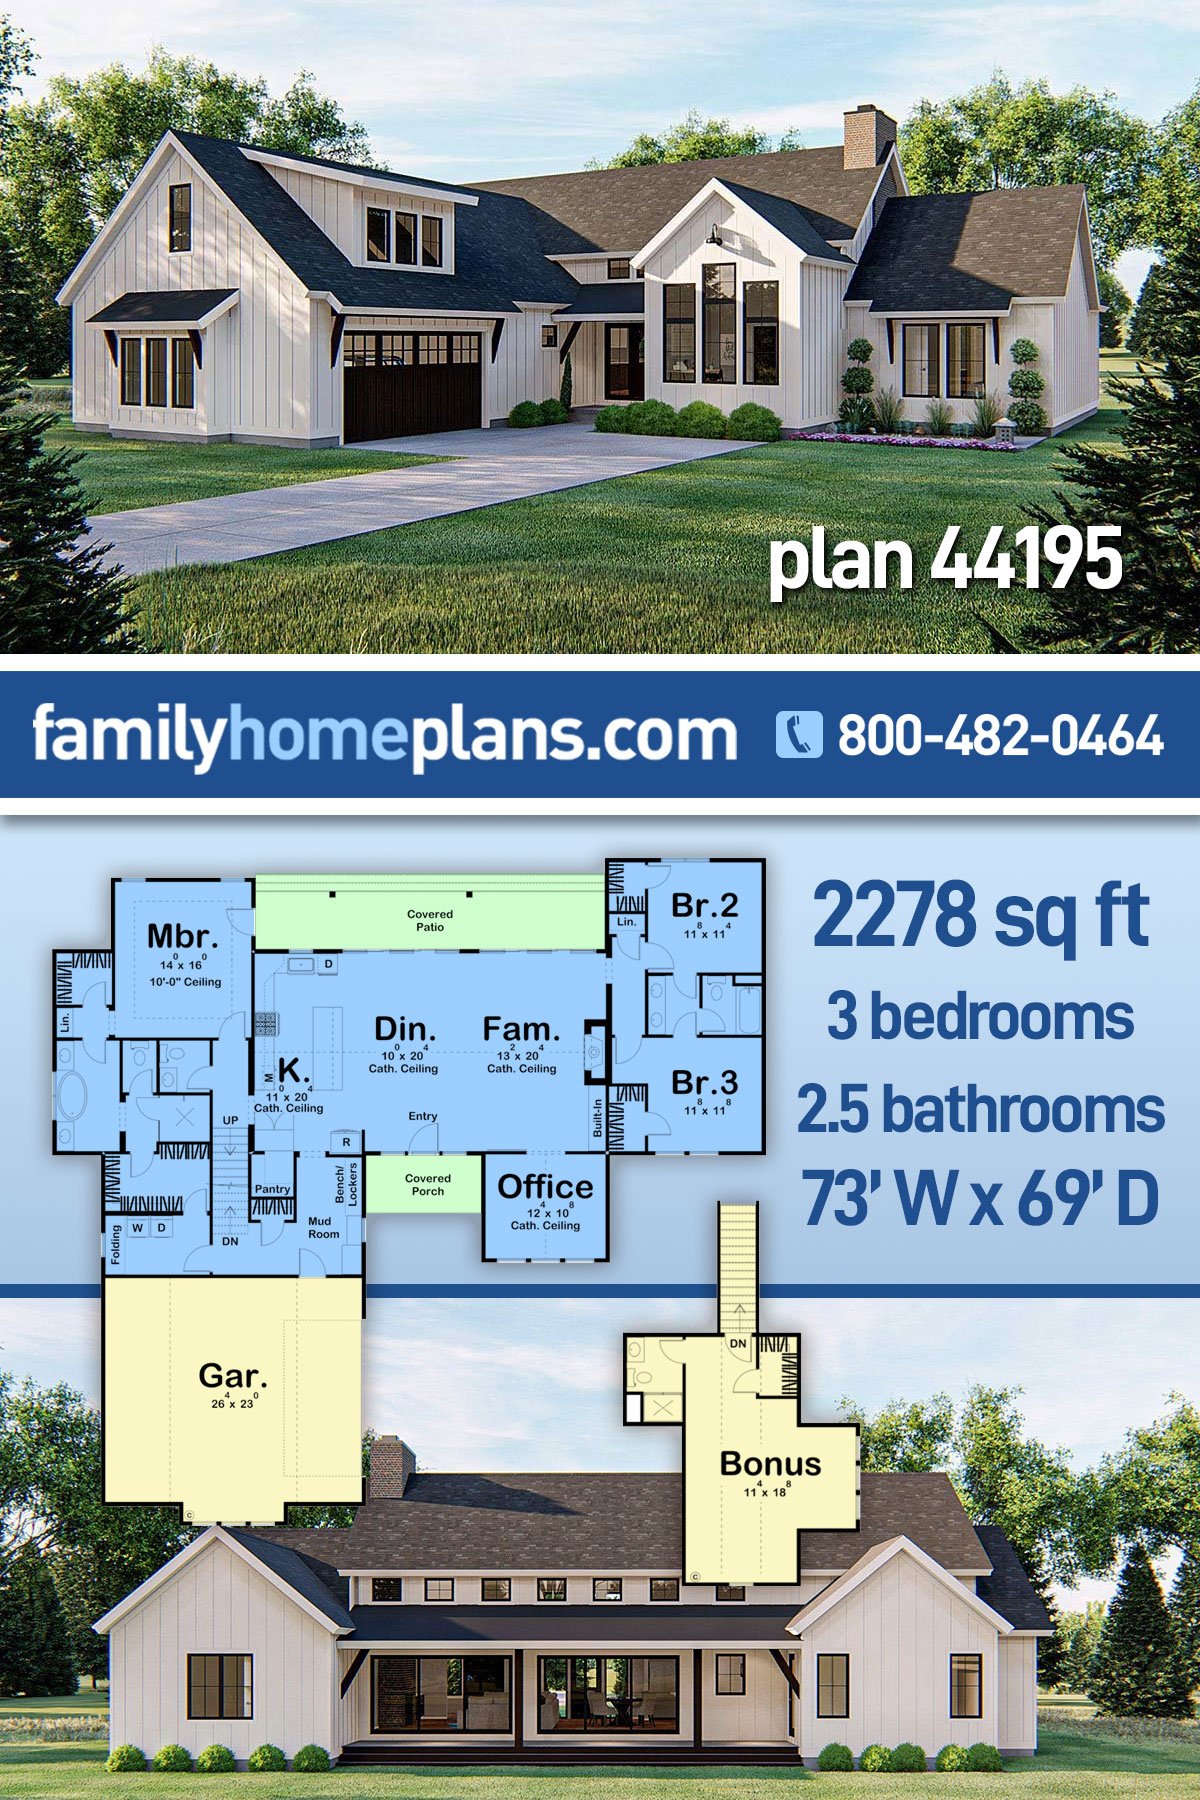 Farmhouse House Plan with 2278 Sq Ft, 3 Bedrooms, 2.5 Baths and a 2 Car ...